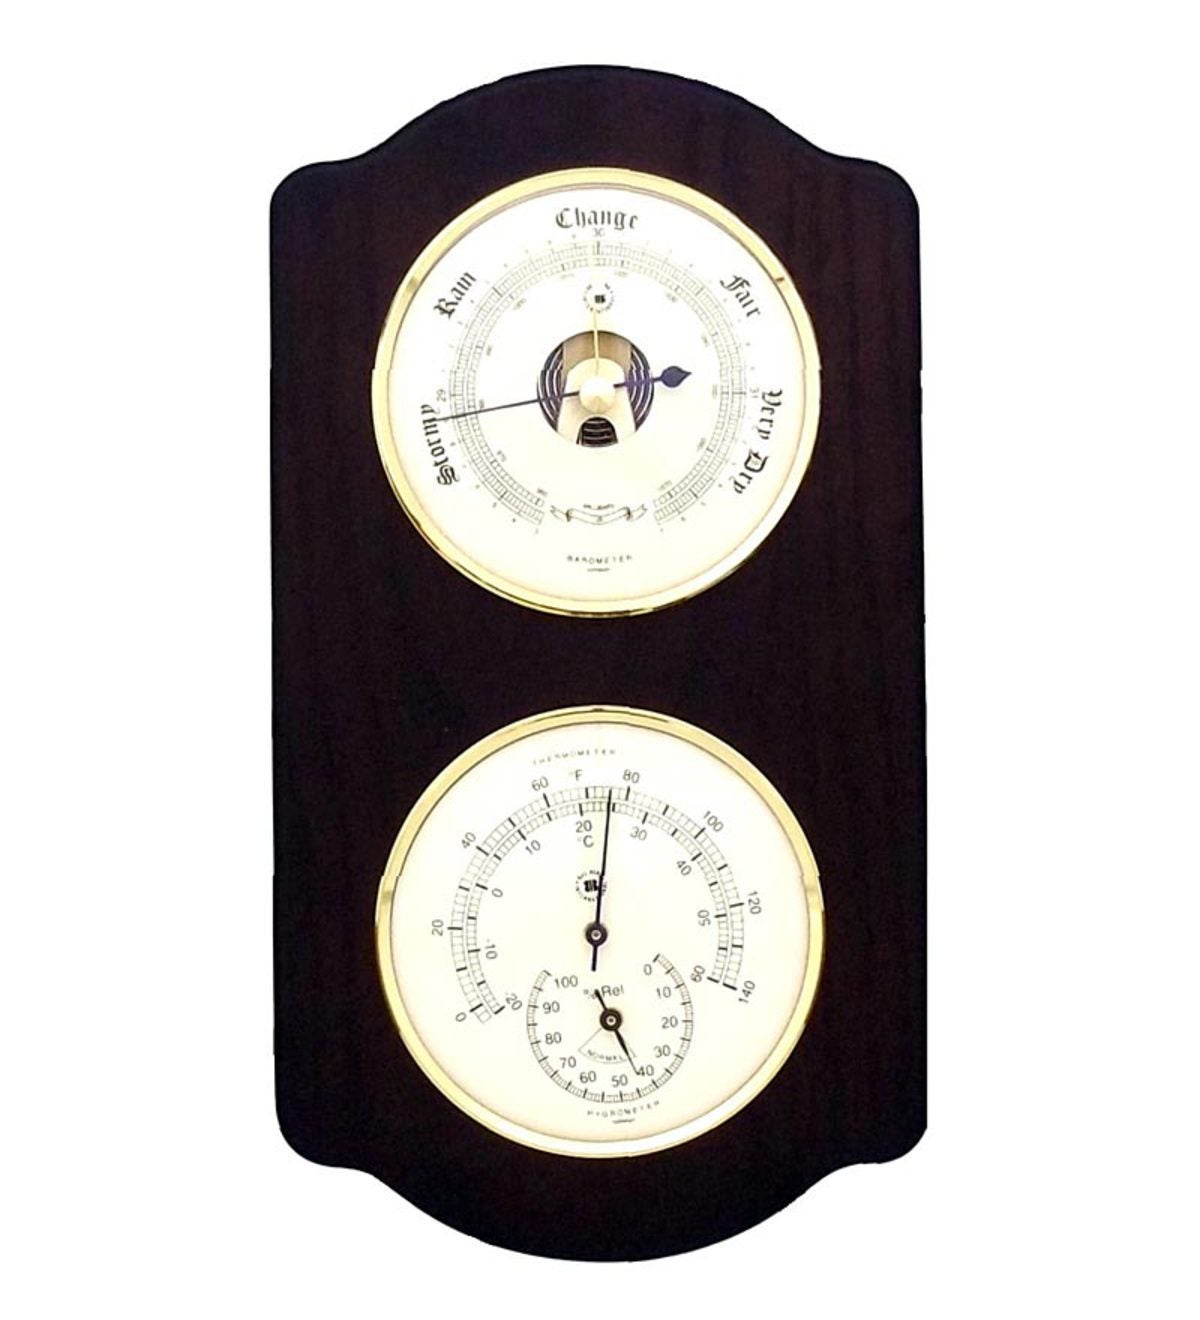 Wall Mount Weather Station With Clock, Barometer, Thermometer And  Hygrometer